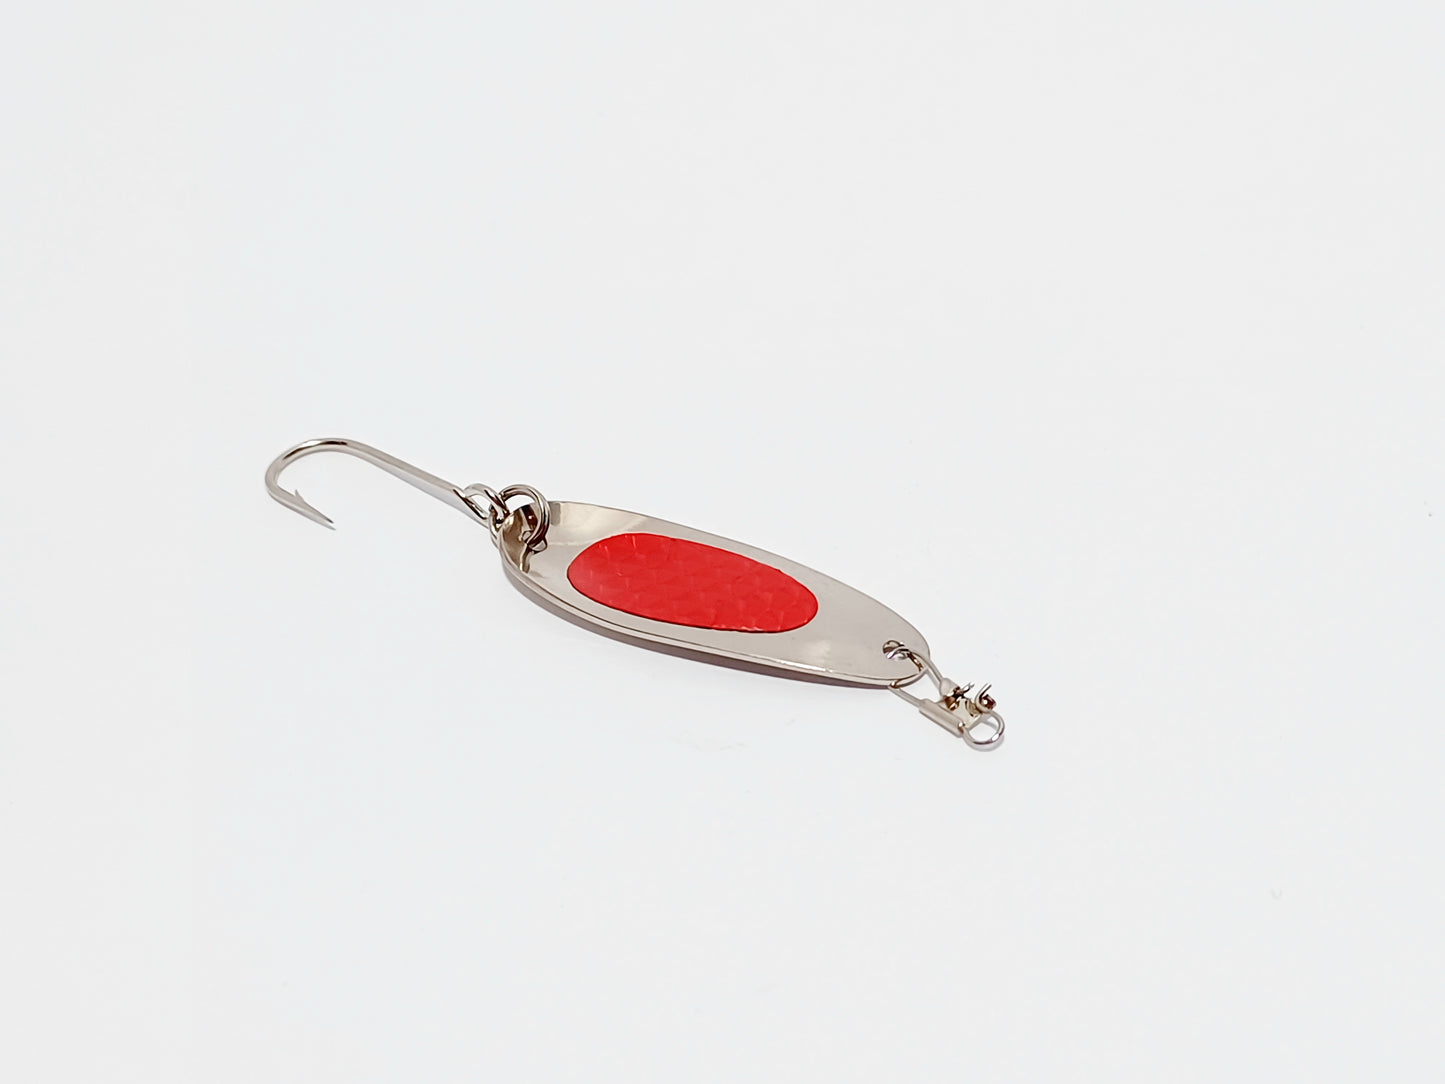 Vintage SEP'S chrome red lure